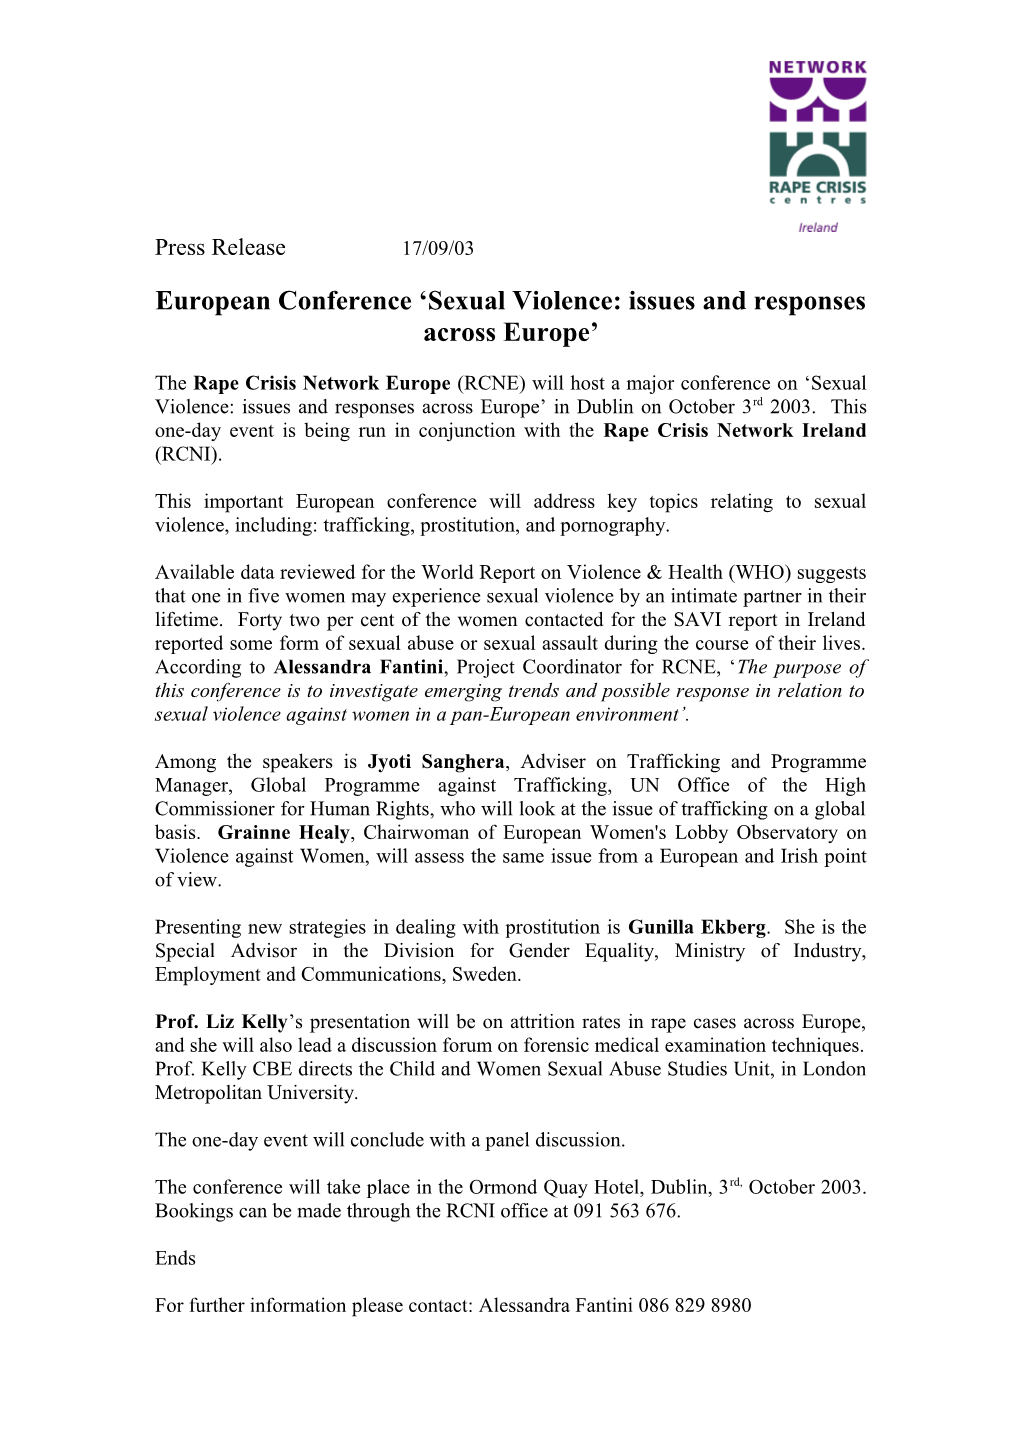 European Conference Sexual Violence: Issues and Responses Across Europe